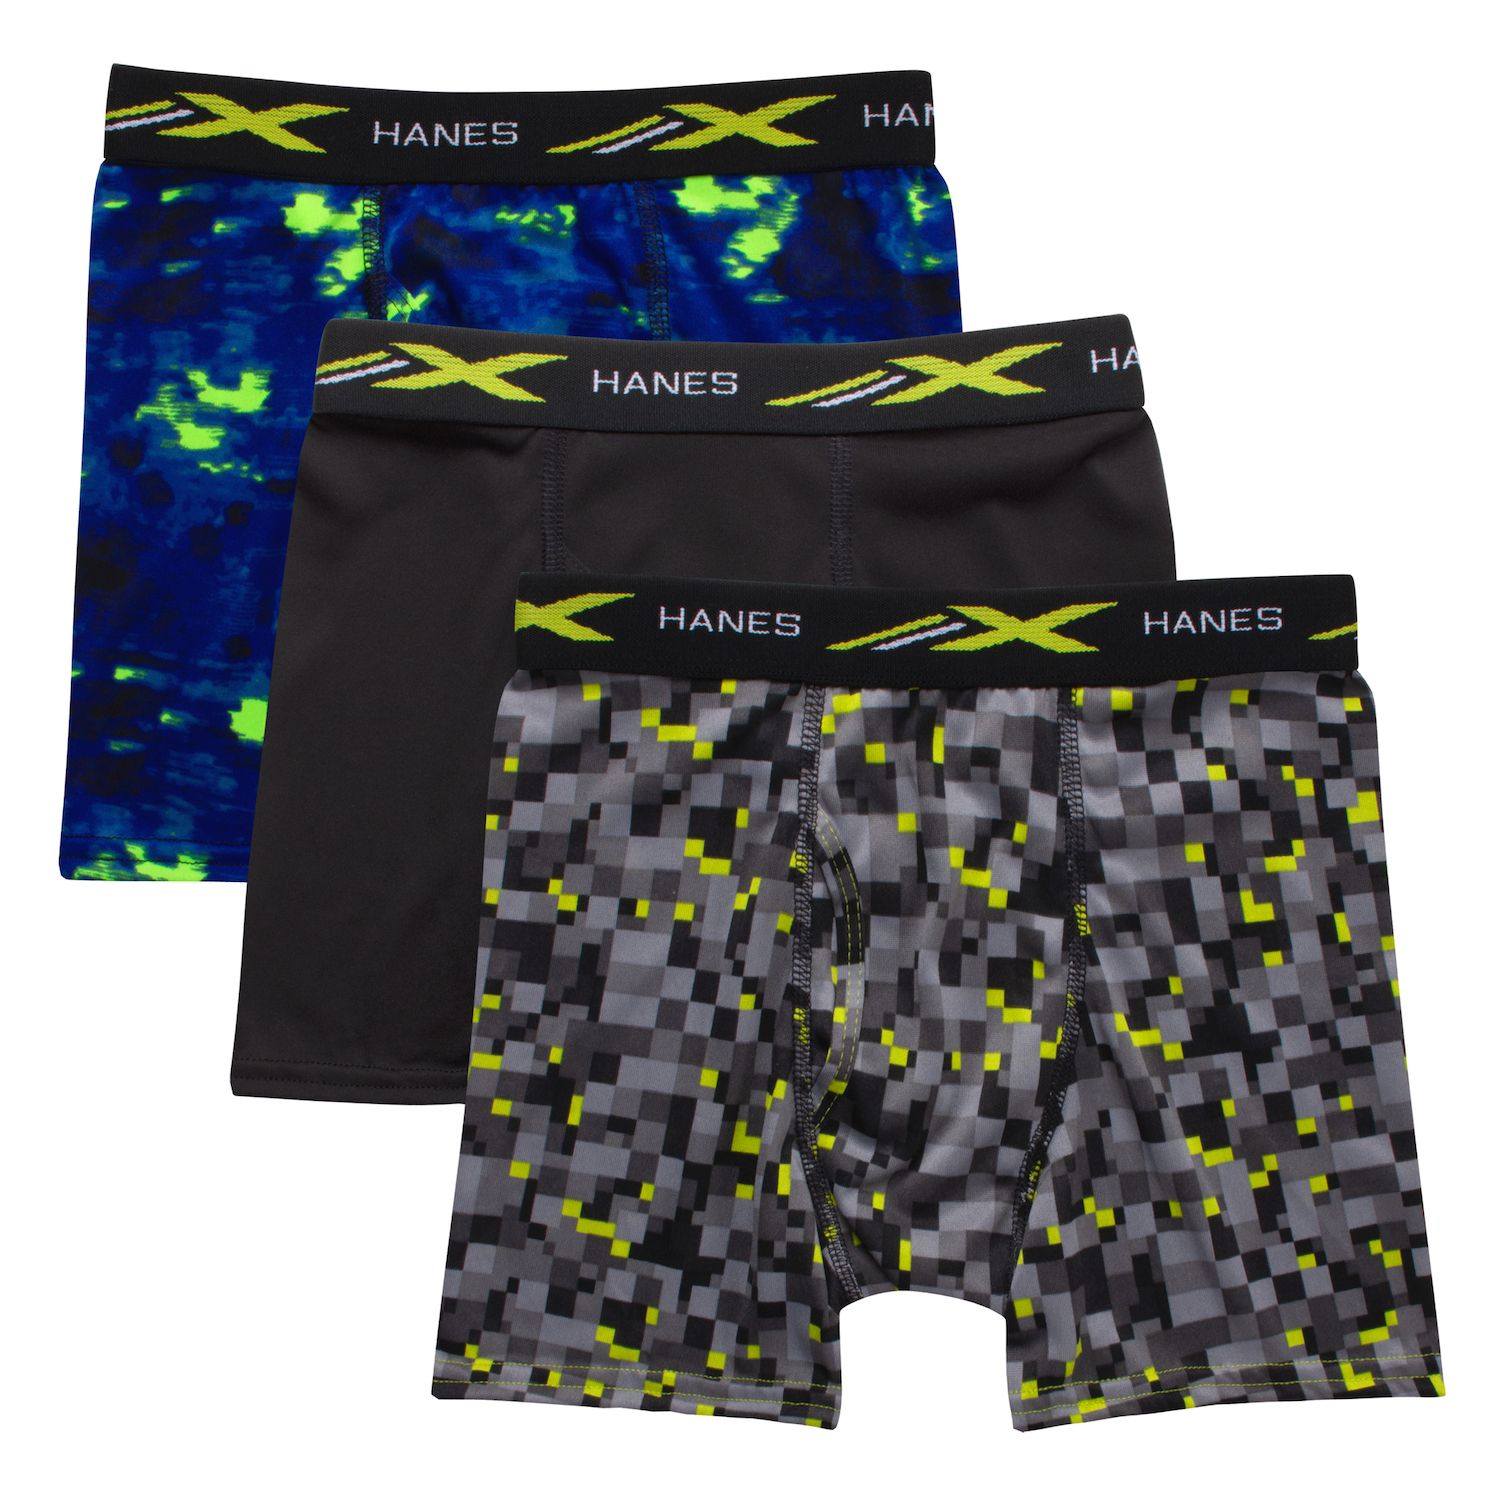 Image for Hanes Boys 6-20 3-Pack X-Temp Boxer Briefs at Kohl's.